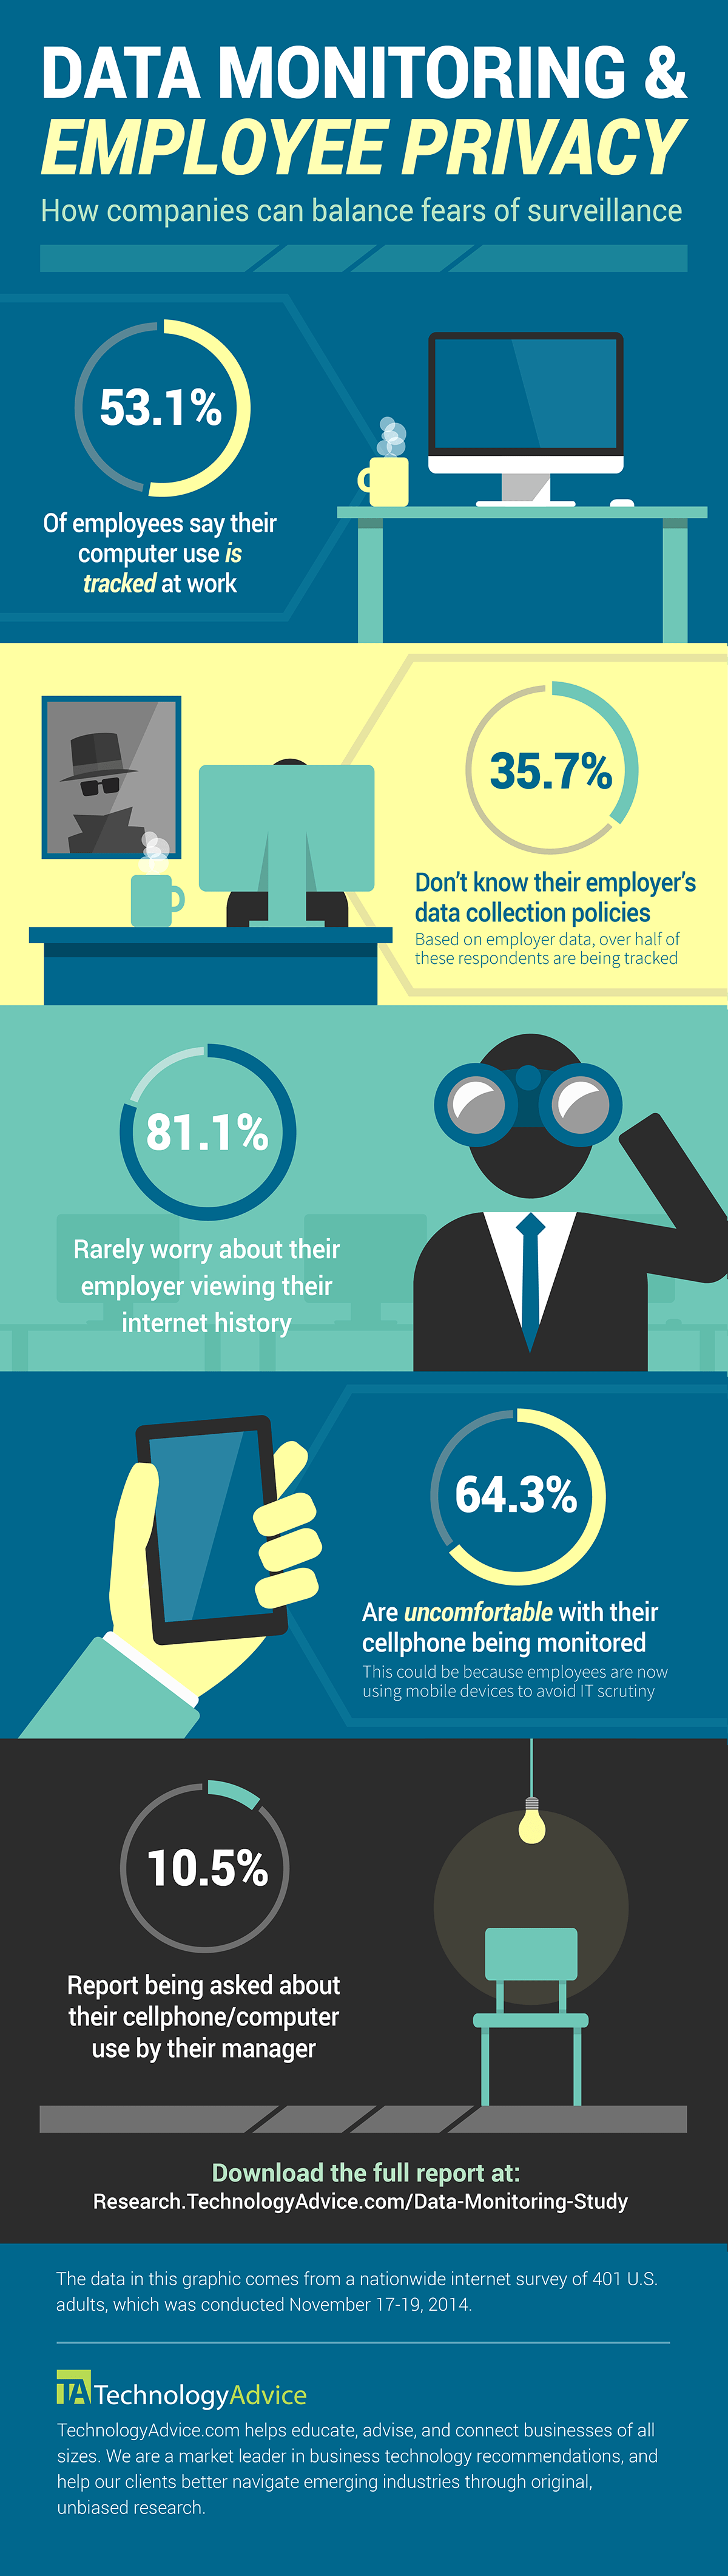 data monitoring and employee privacy infographic